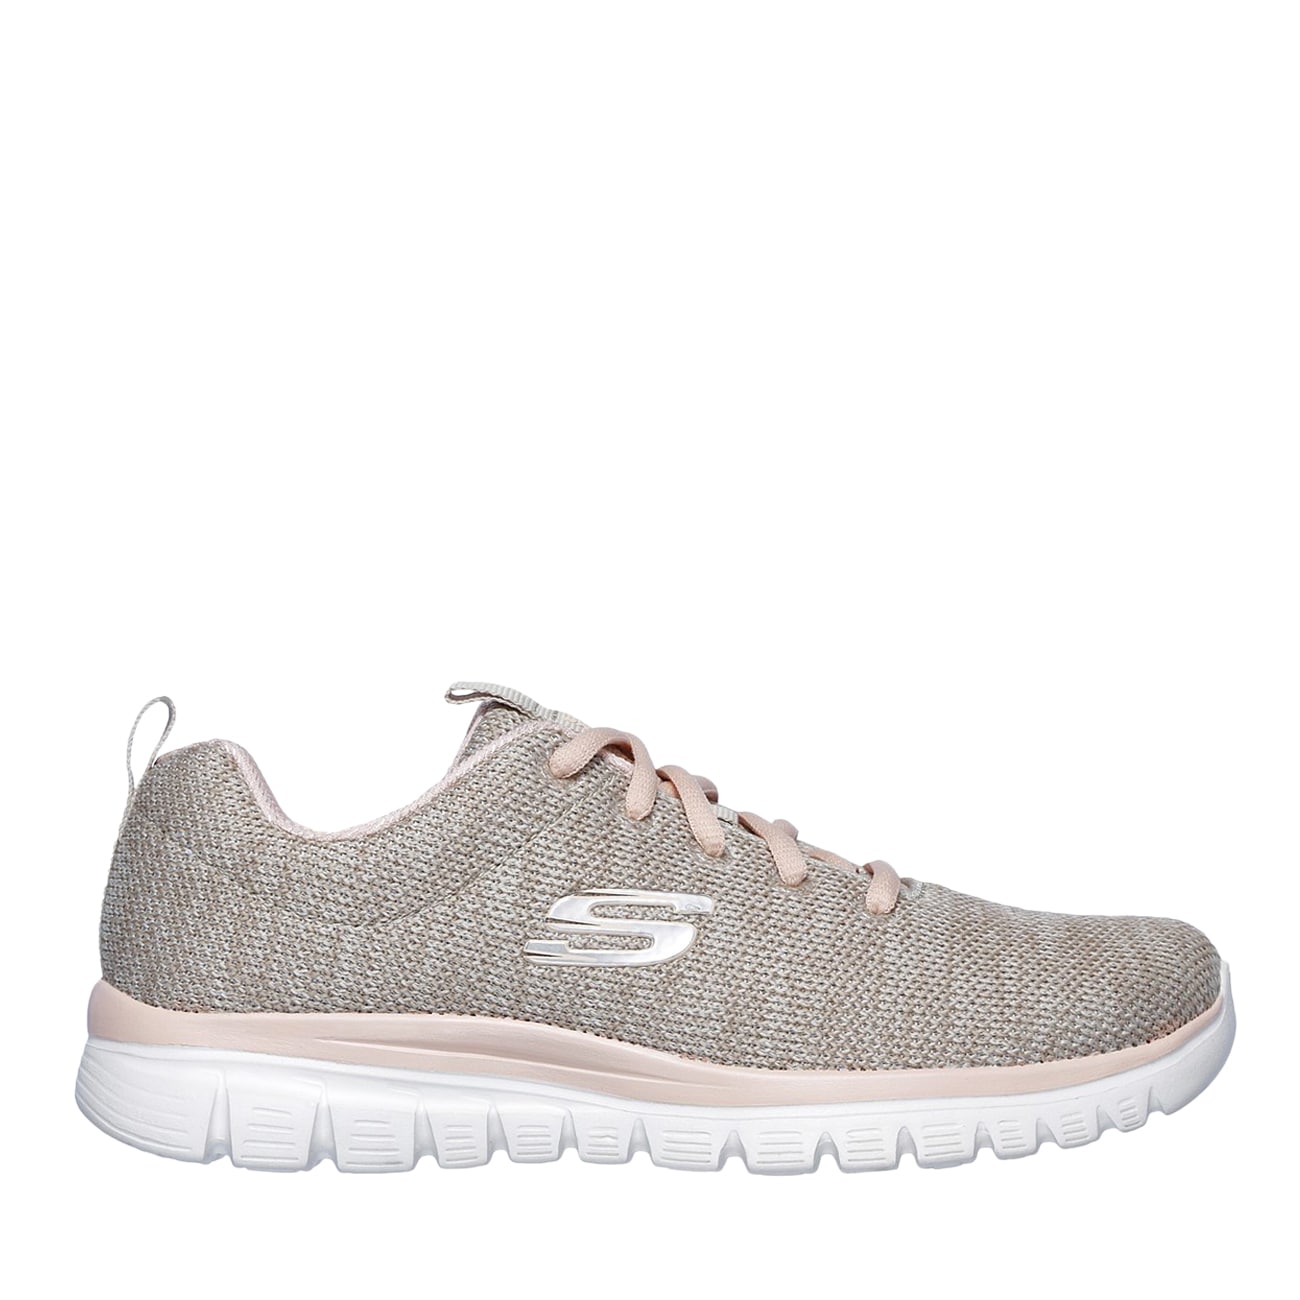 skechers graceful twisted fortune review